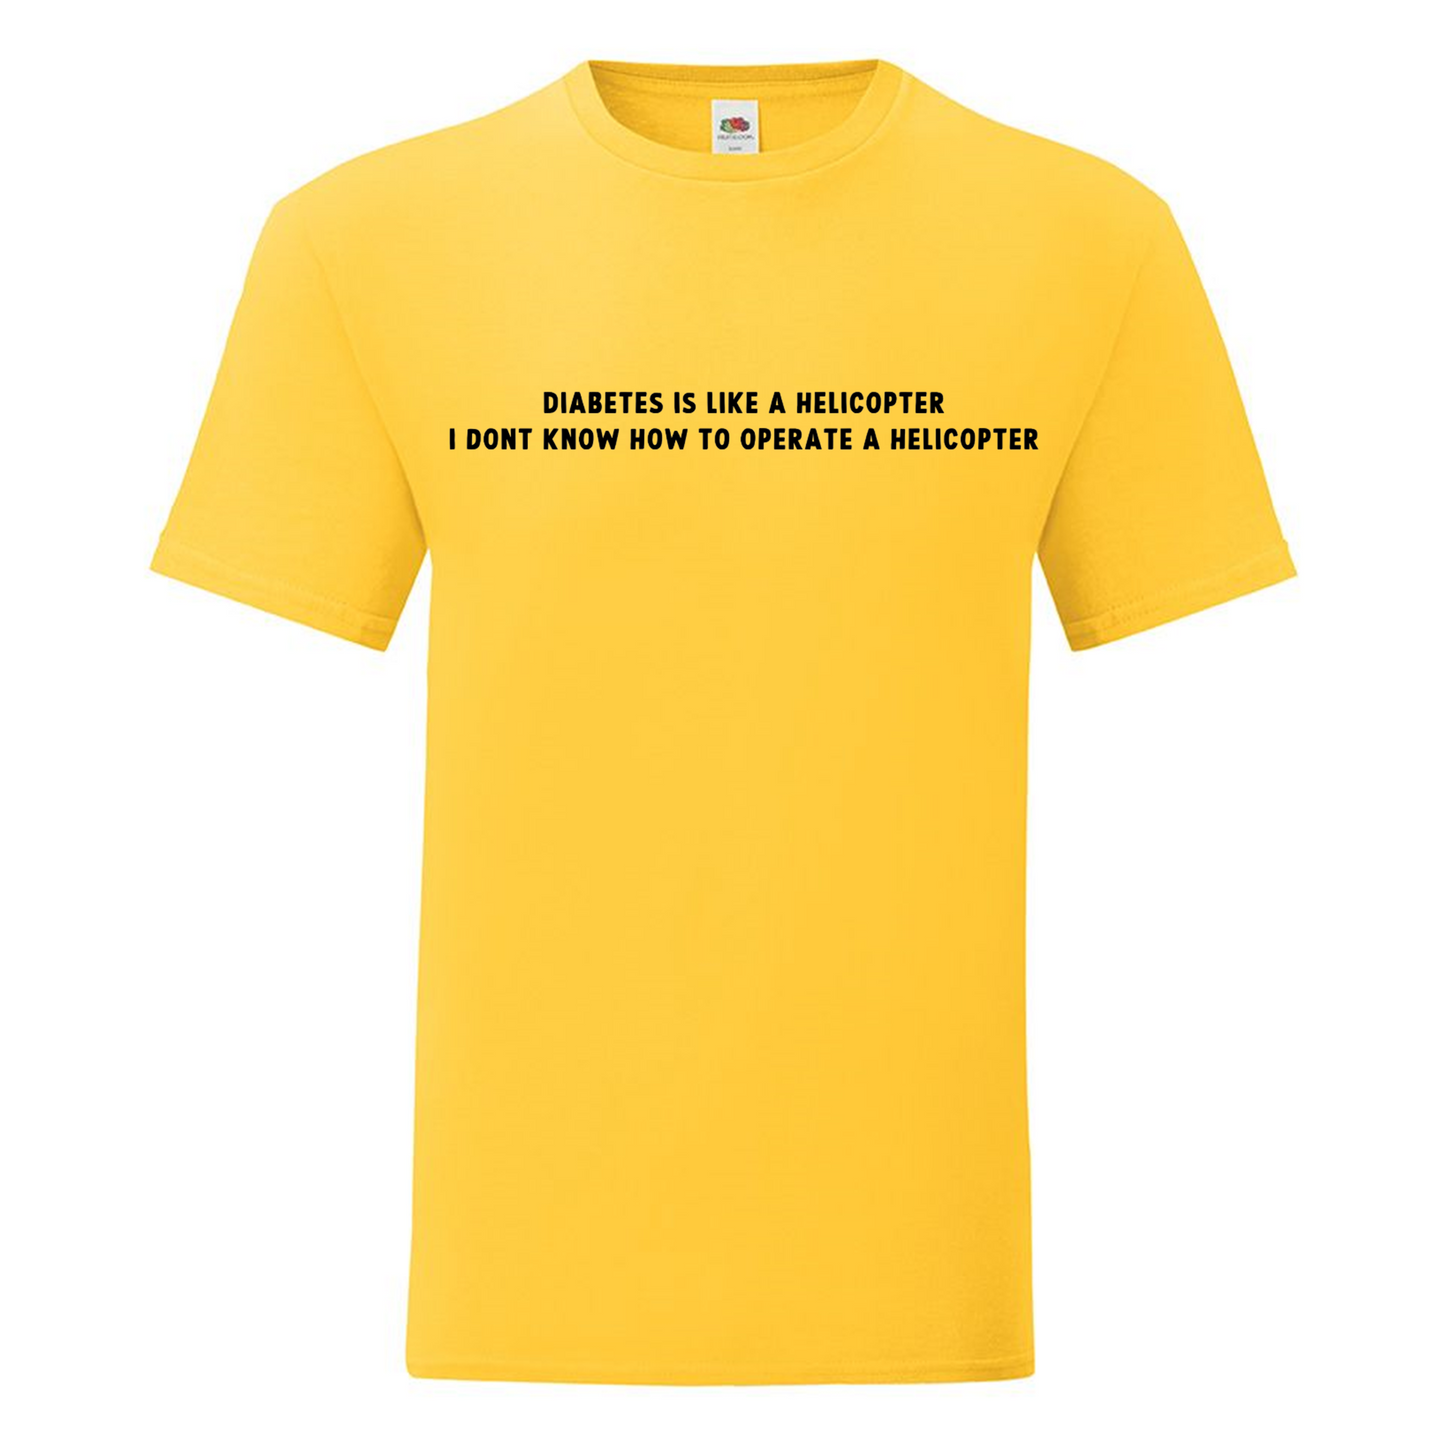 Diabetes Is Like A Helicopter, I Dont Know How To Operate A Helicopter Kids T Shirt